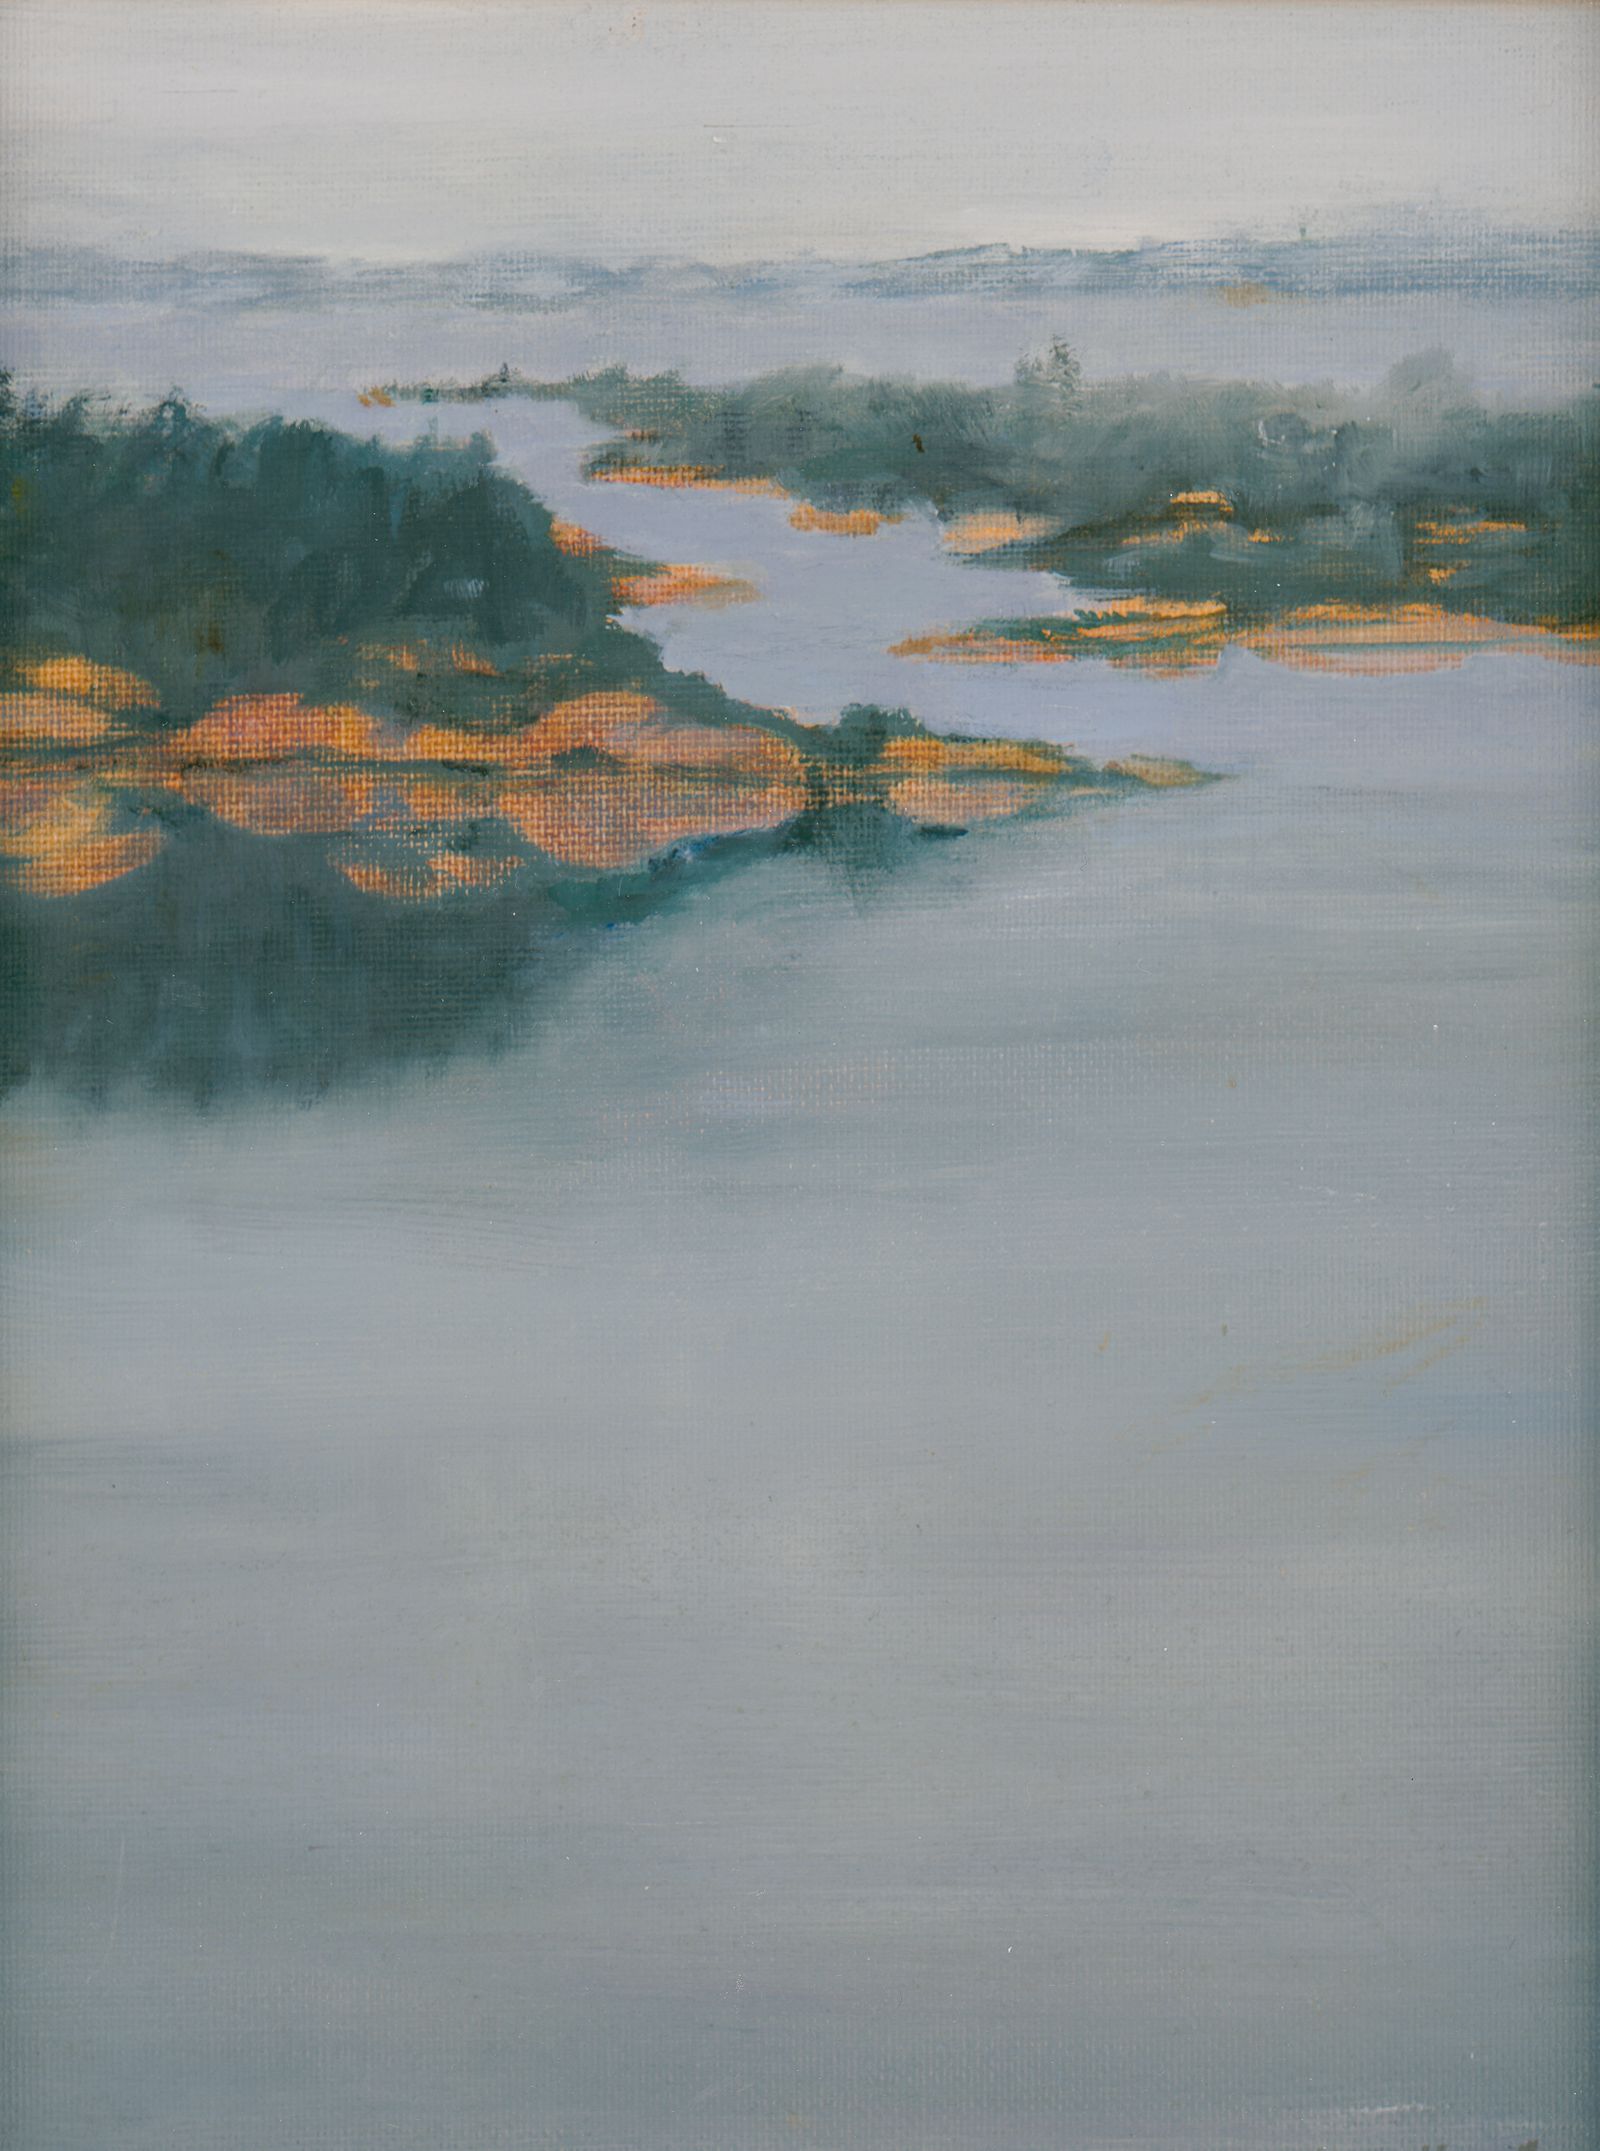 This is an oil painting with a view looking down toward an island peninsula covered with pine with a narrow bay that opens toward more distant islands.